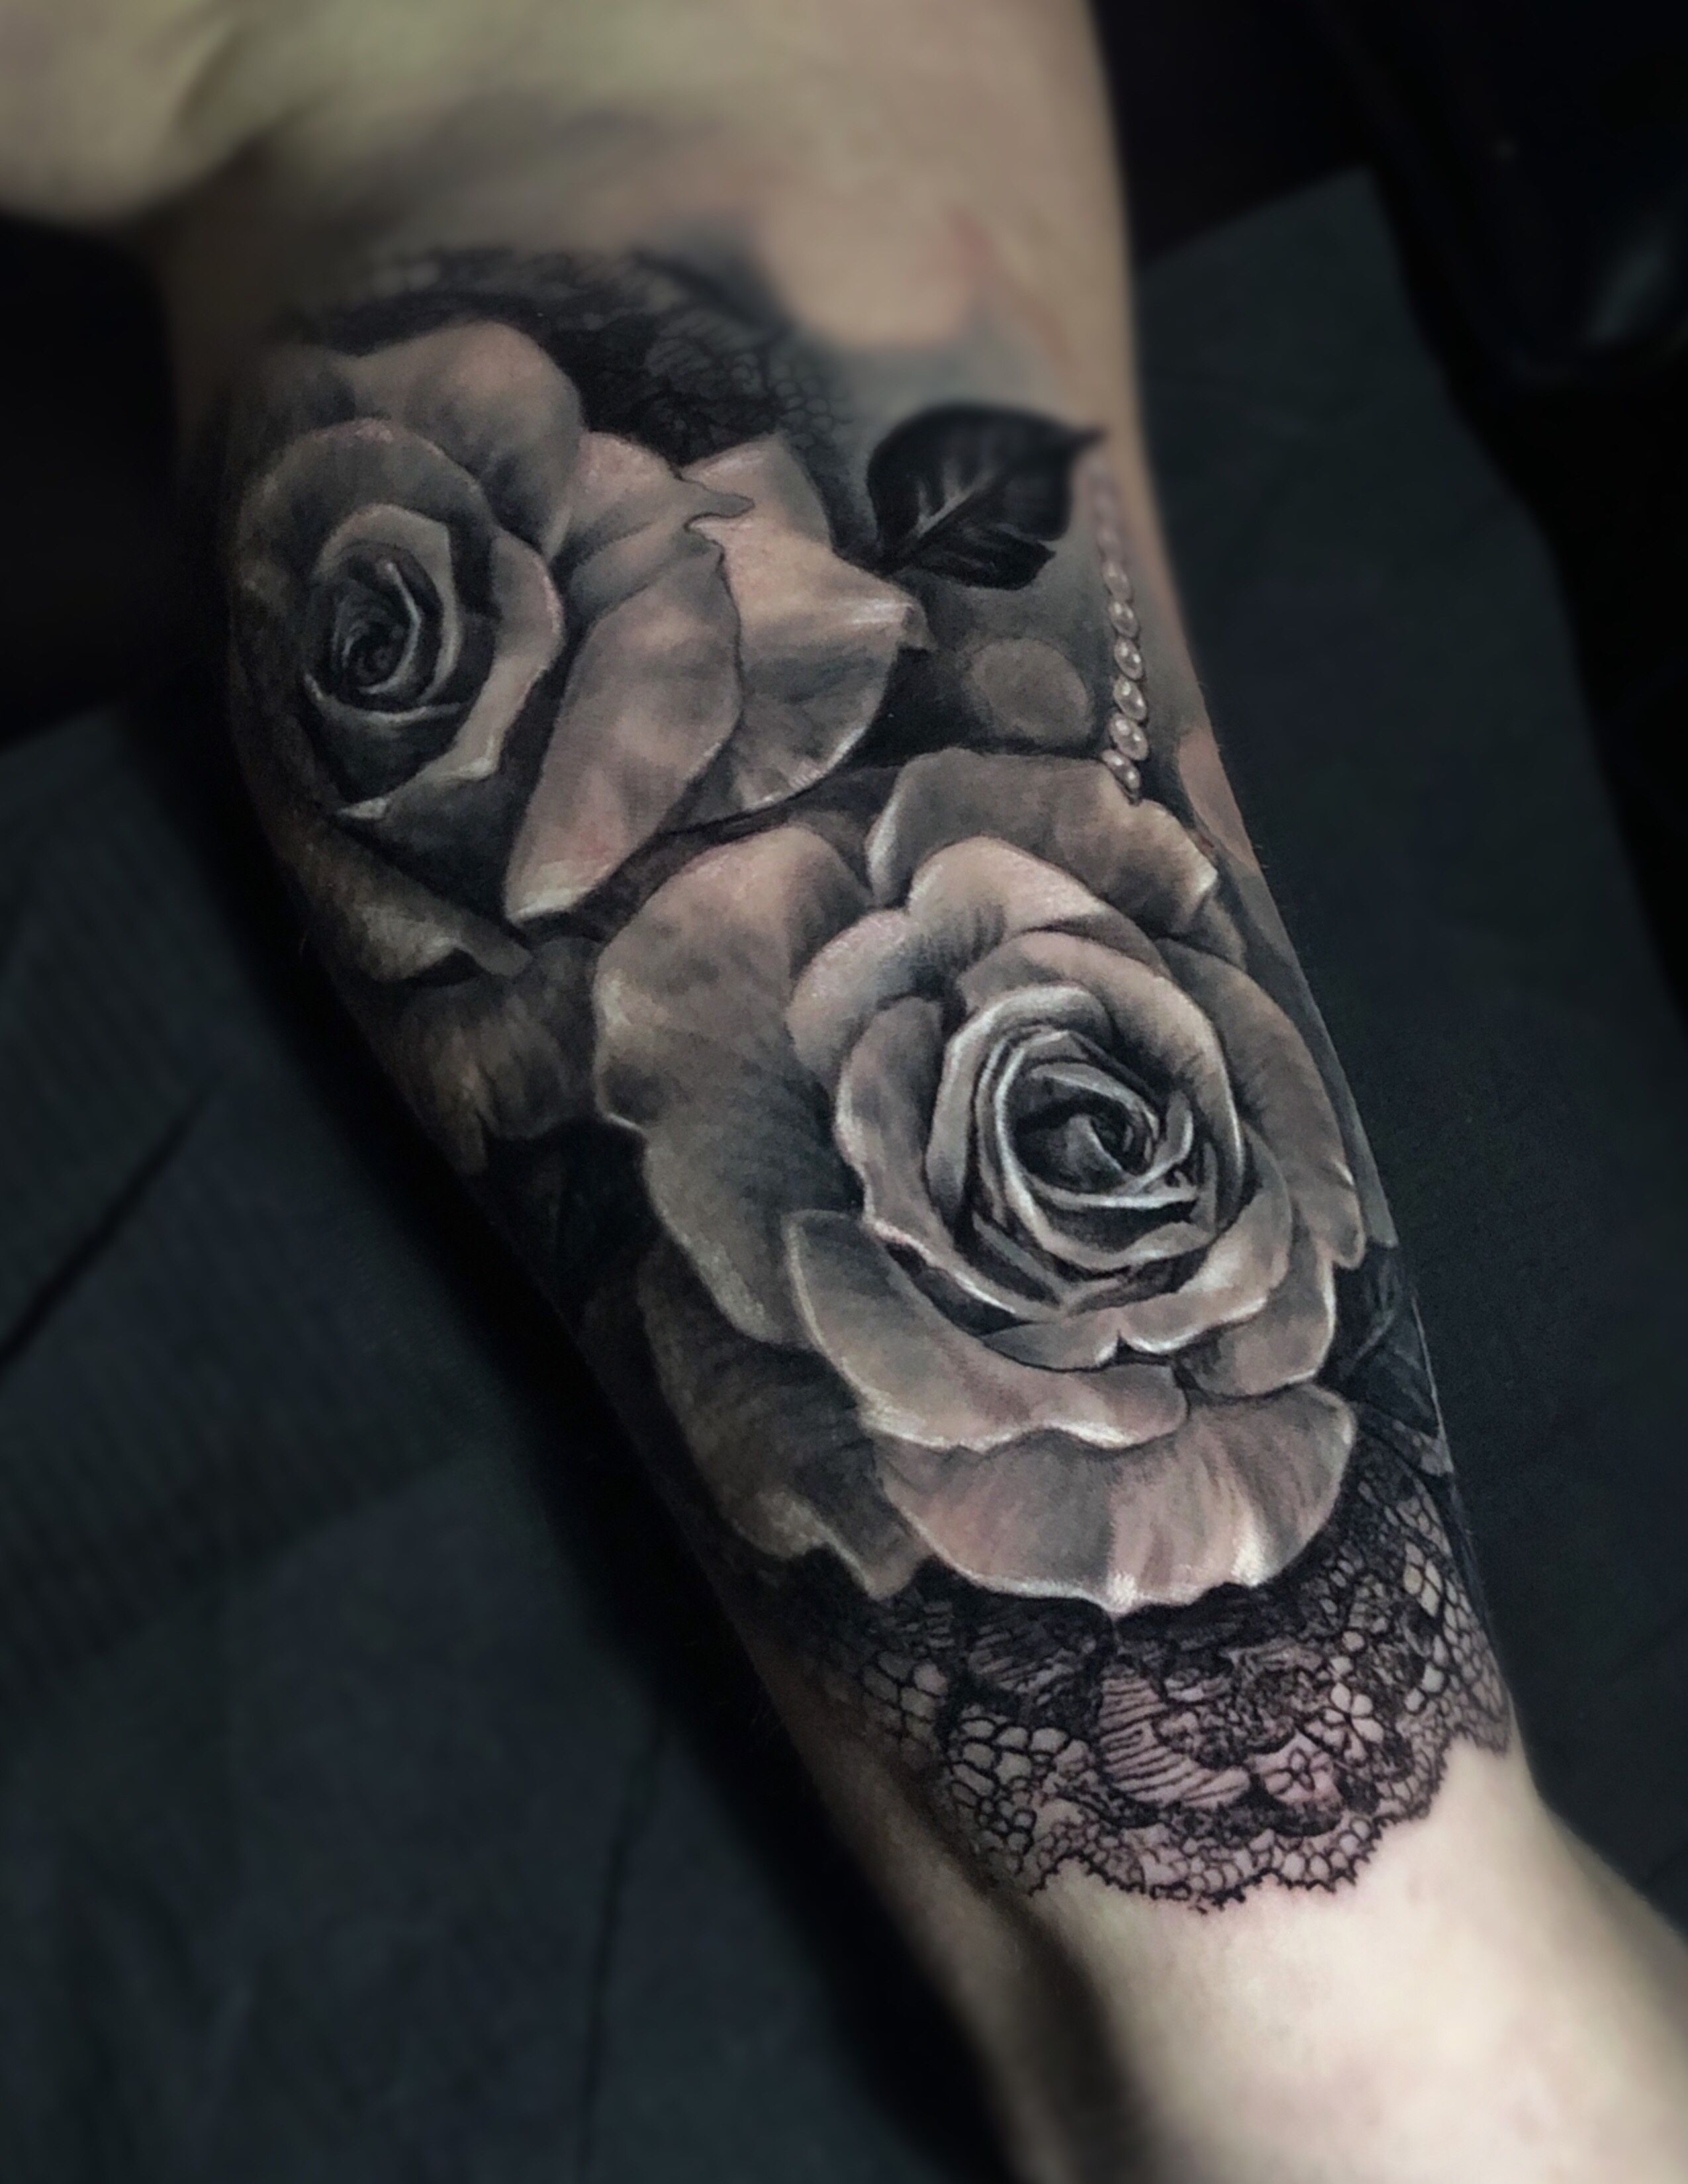 Tattoo uploaded by Tye Tremblay  Roses and lace with pearls rose  rosetattoo lace lacetattoo  Tattoodo